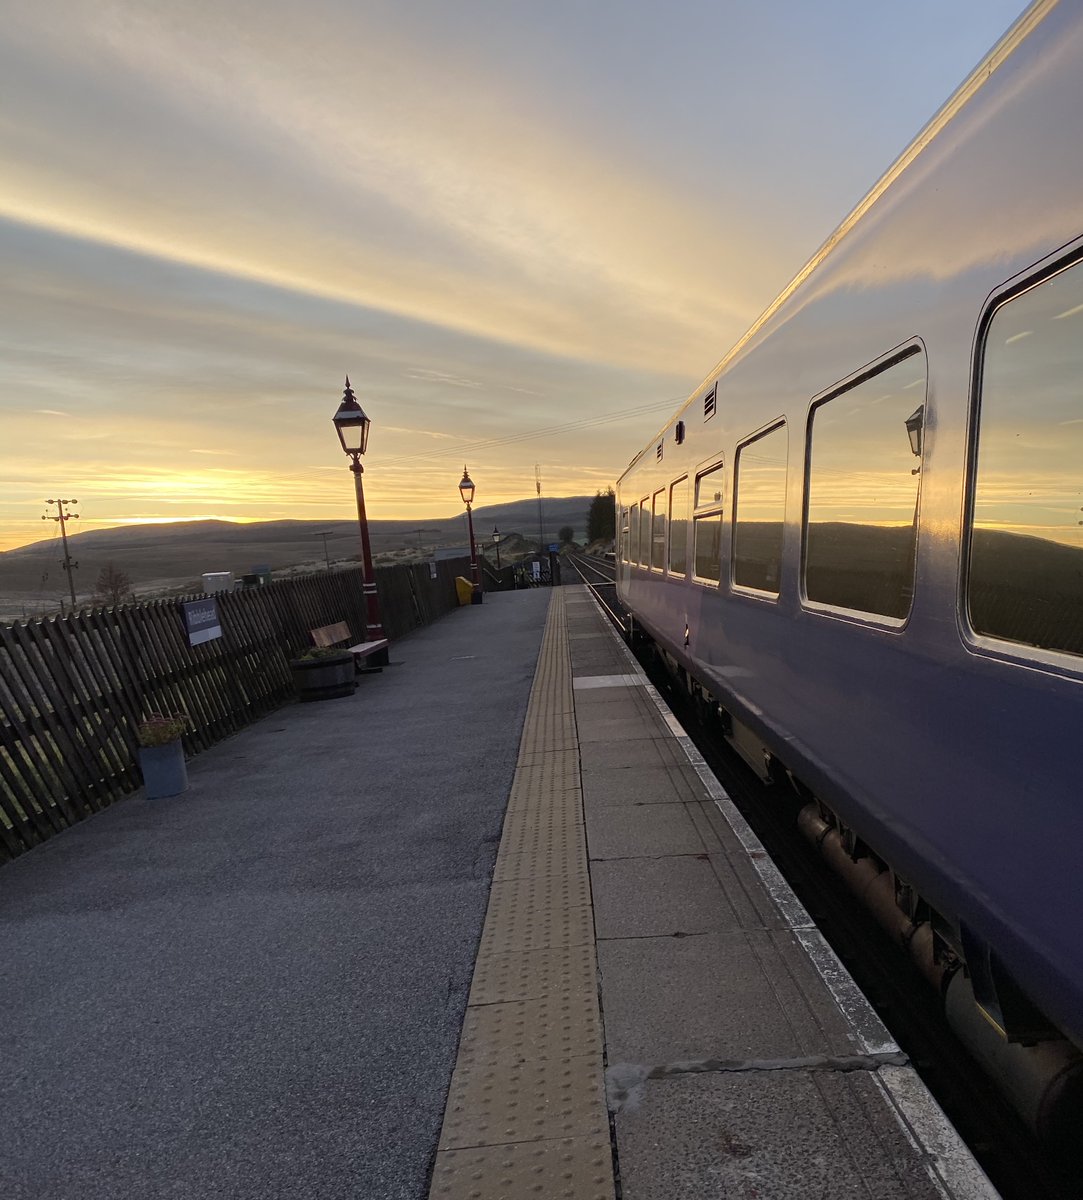 For new and existing public transport options into and around the National Park, visit 👇

🚉 - settle-carlisle.co.uk
🚌 - dalesbus.org

#YorkshireDales #PublicTransport